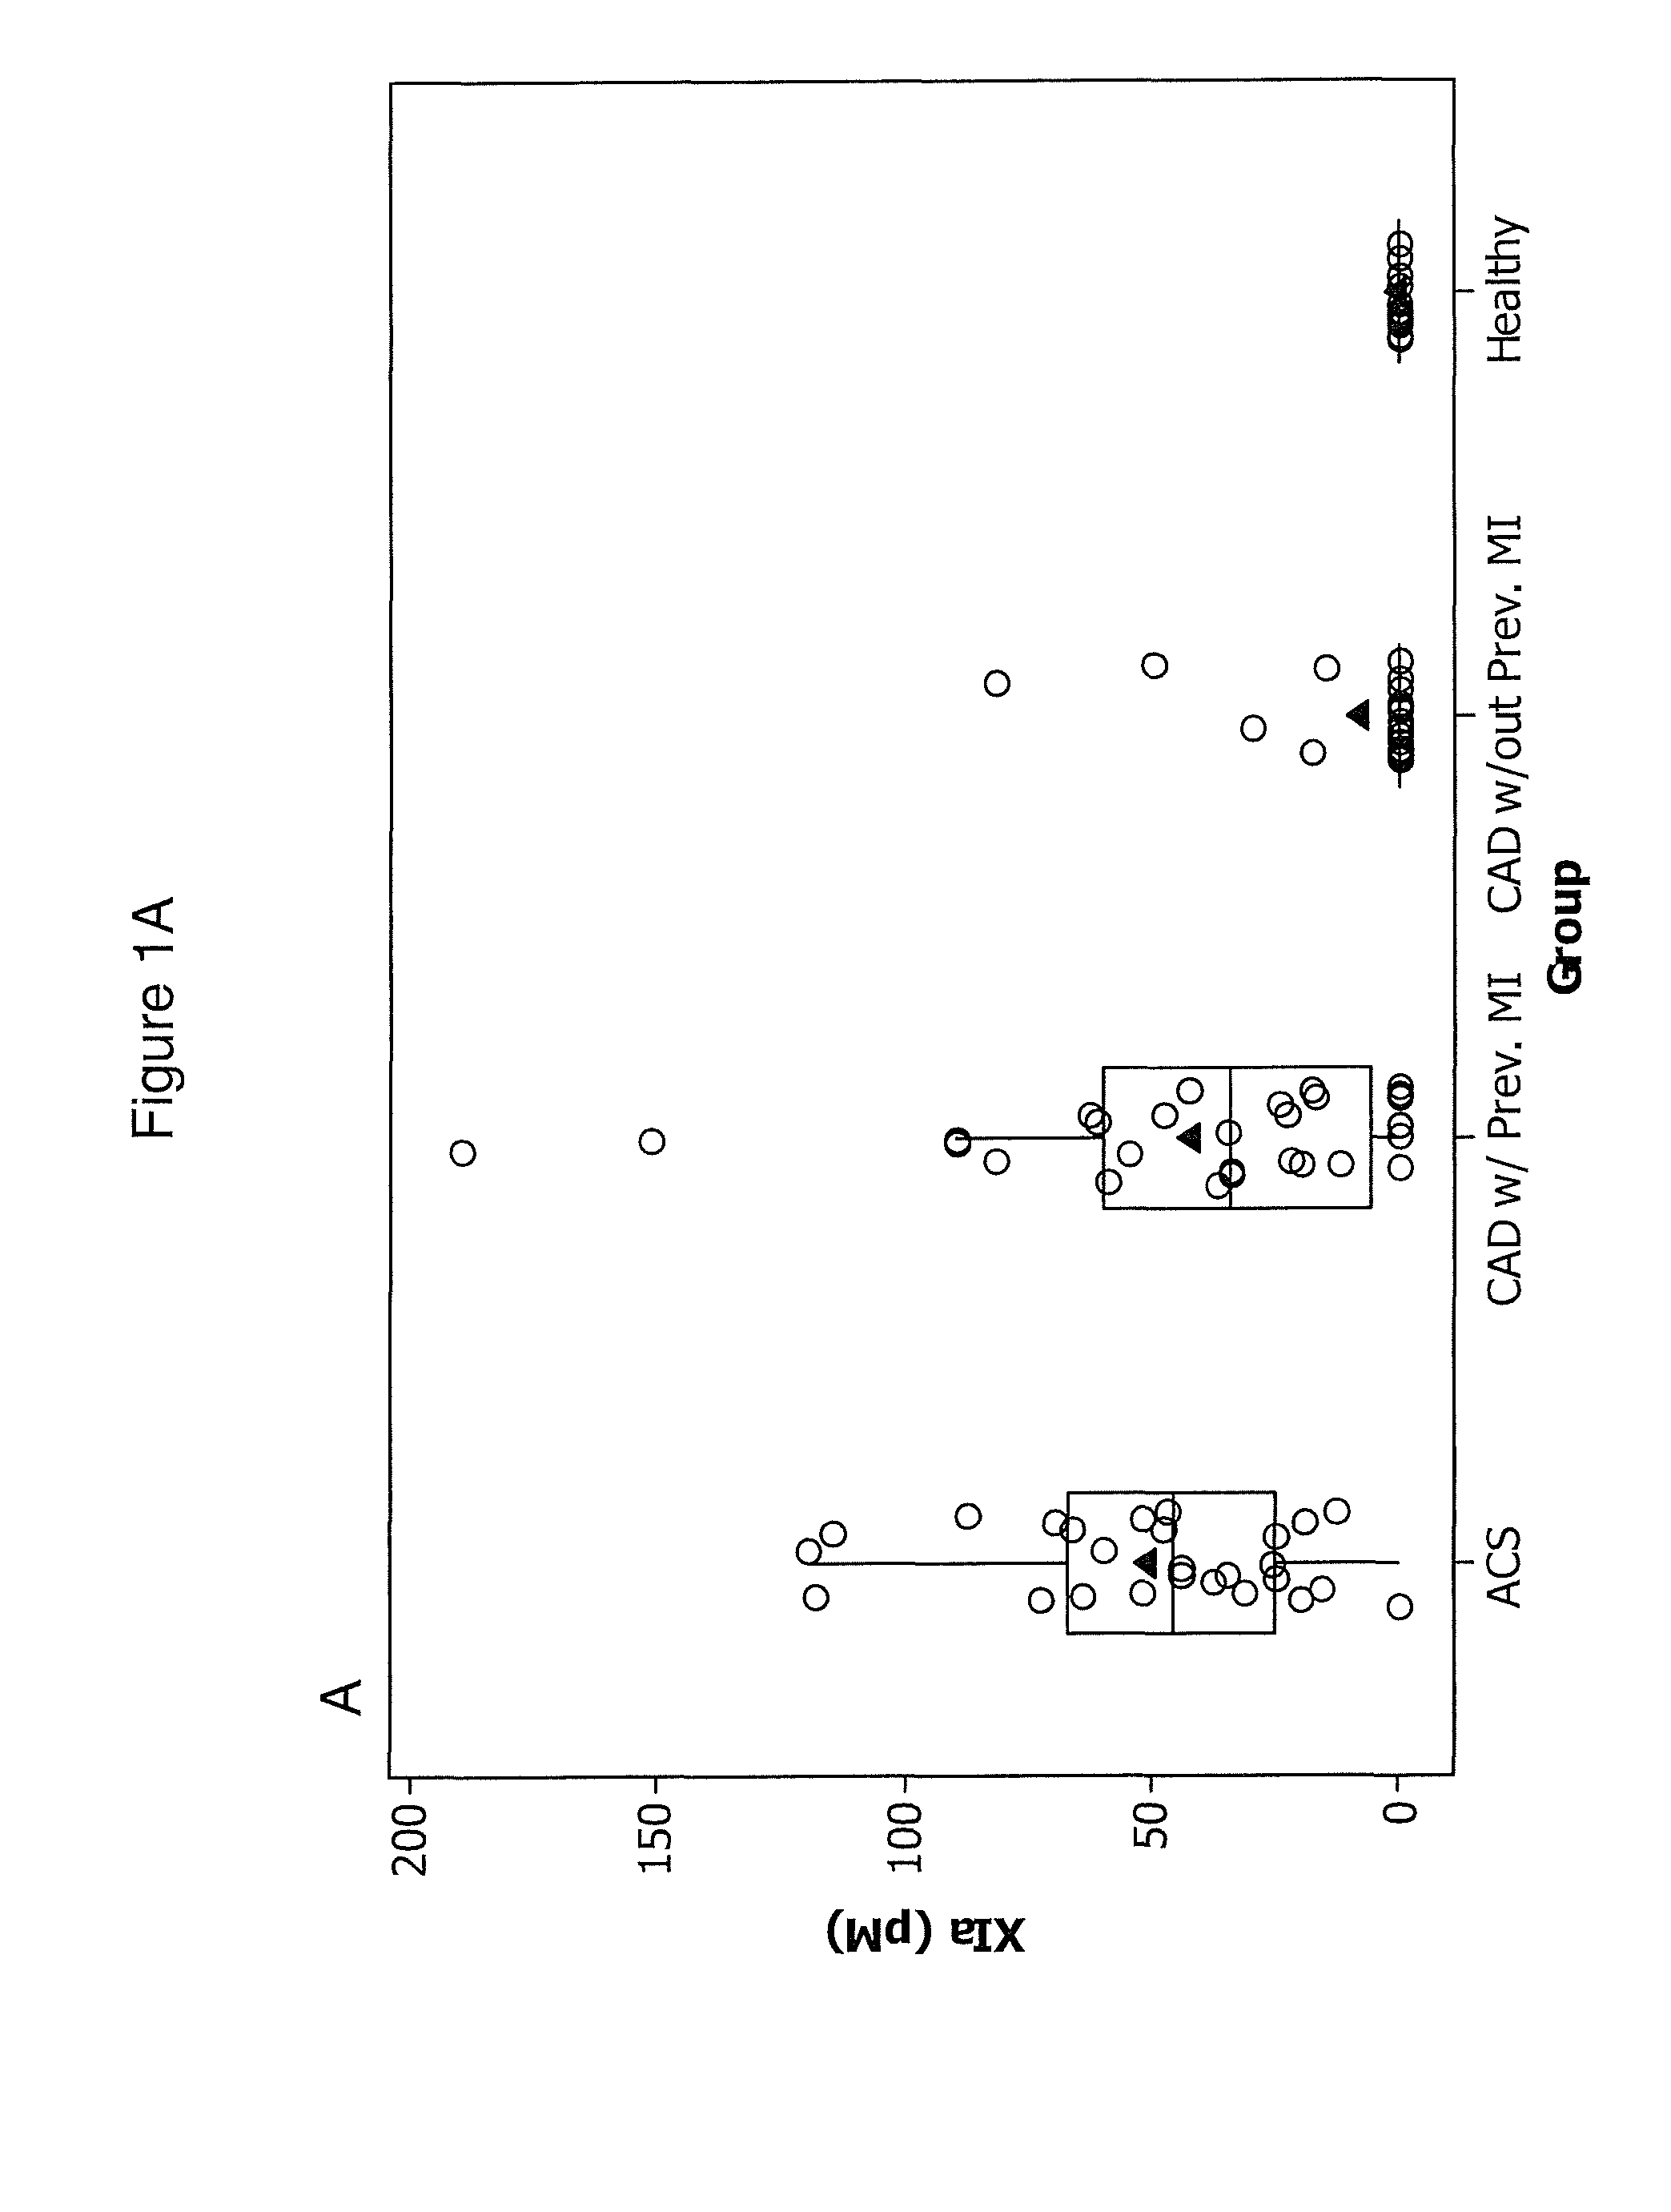 Methods of detection of factor XIa and tissue factor